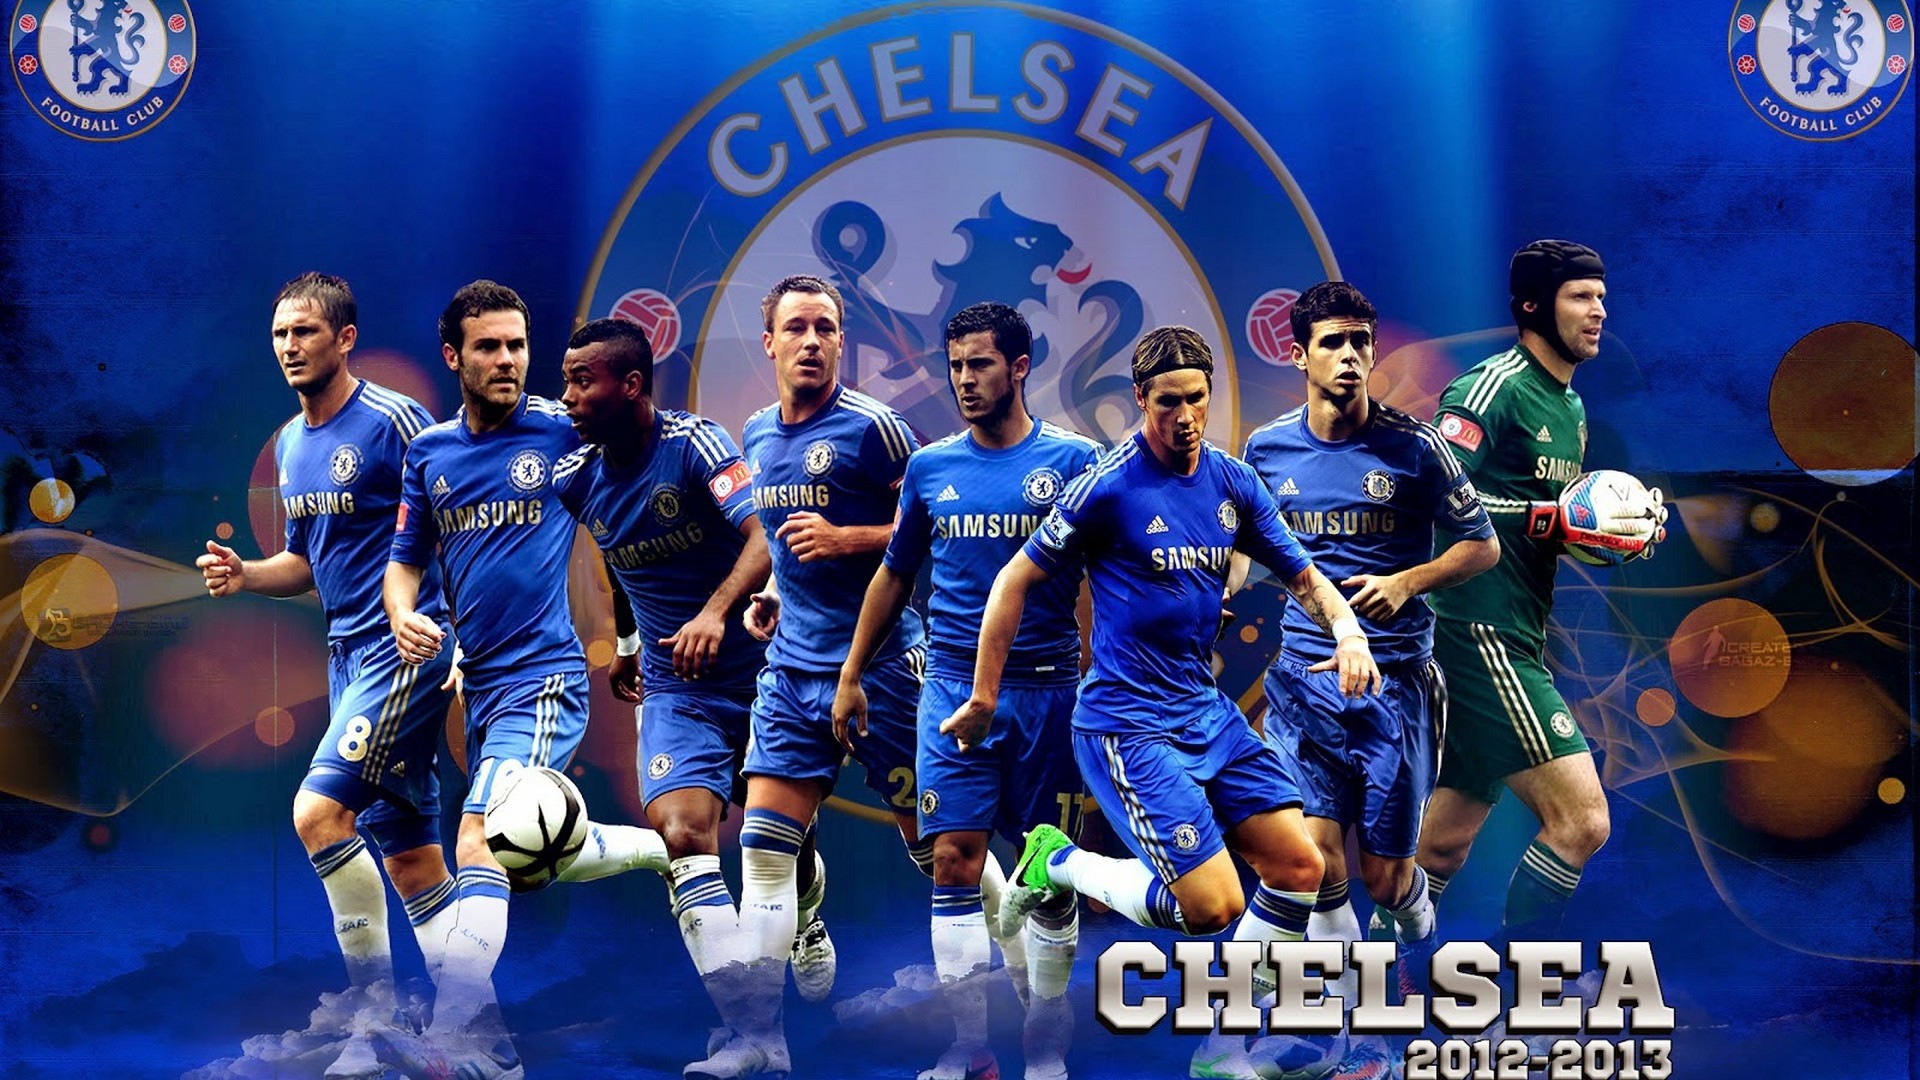 Chelsea Champions League Desktop Wallpaper with high-resolution 1920x1080 pixel. You can use this wallpaper for your Desktop Computers, Mac Screensavers, Windows Backgrounds, iPhone Wallpapers, Tablet or Android Lock screen and another Mobile device